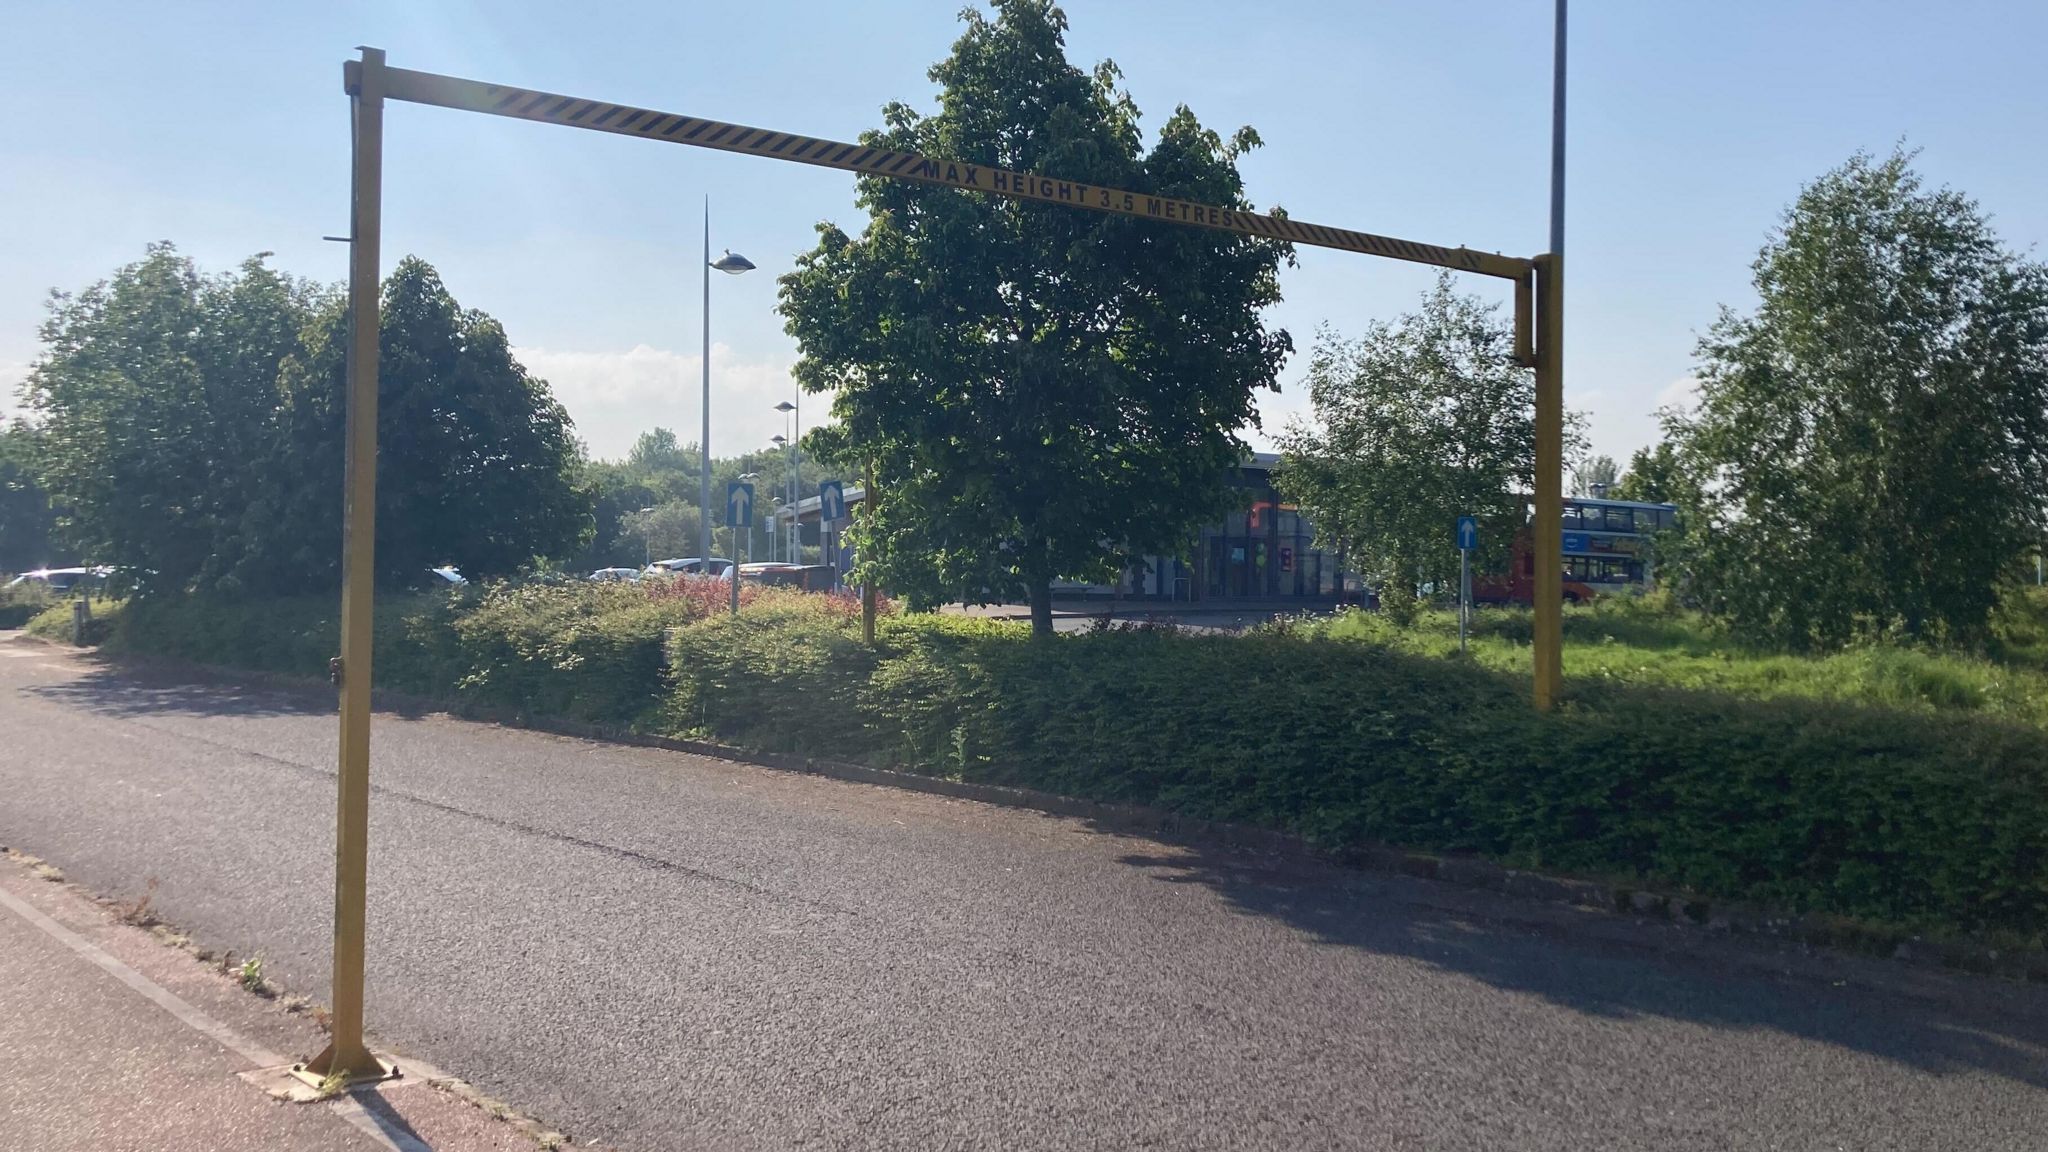 New low height barriers among measures for Silk Mills park and ride